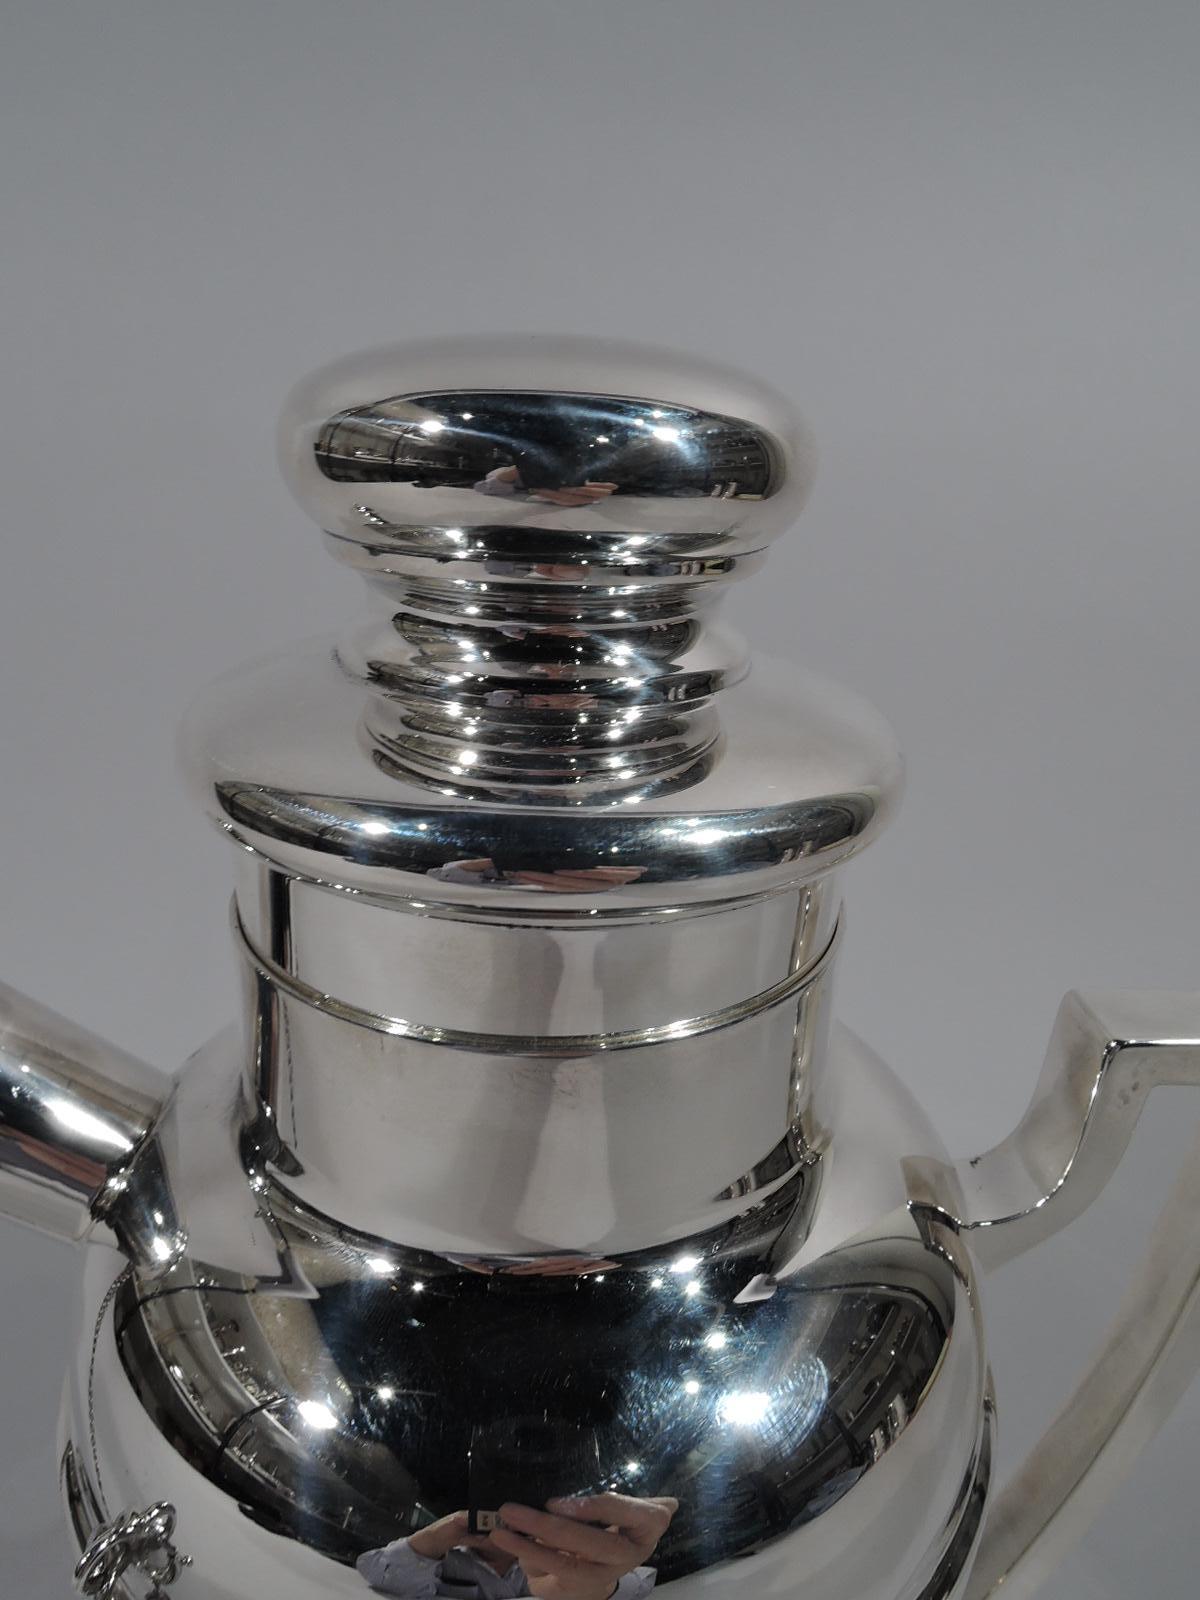 Mid-Century Modern sterling silver cocktail Shaker. Retailed by Cartier in New York. Straight and tapering sides, curved shoulder, scroll bracket handle, and short inset neck. Stubby diagonal spout with built-in strainer and chained cap. Cover